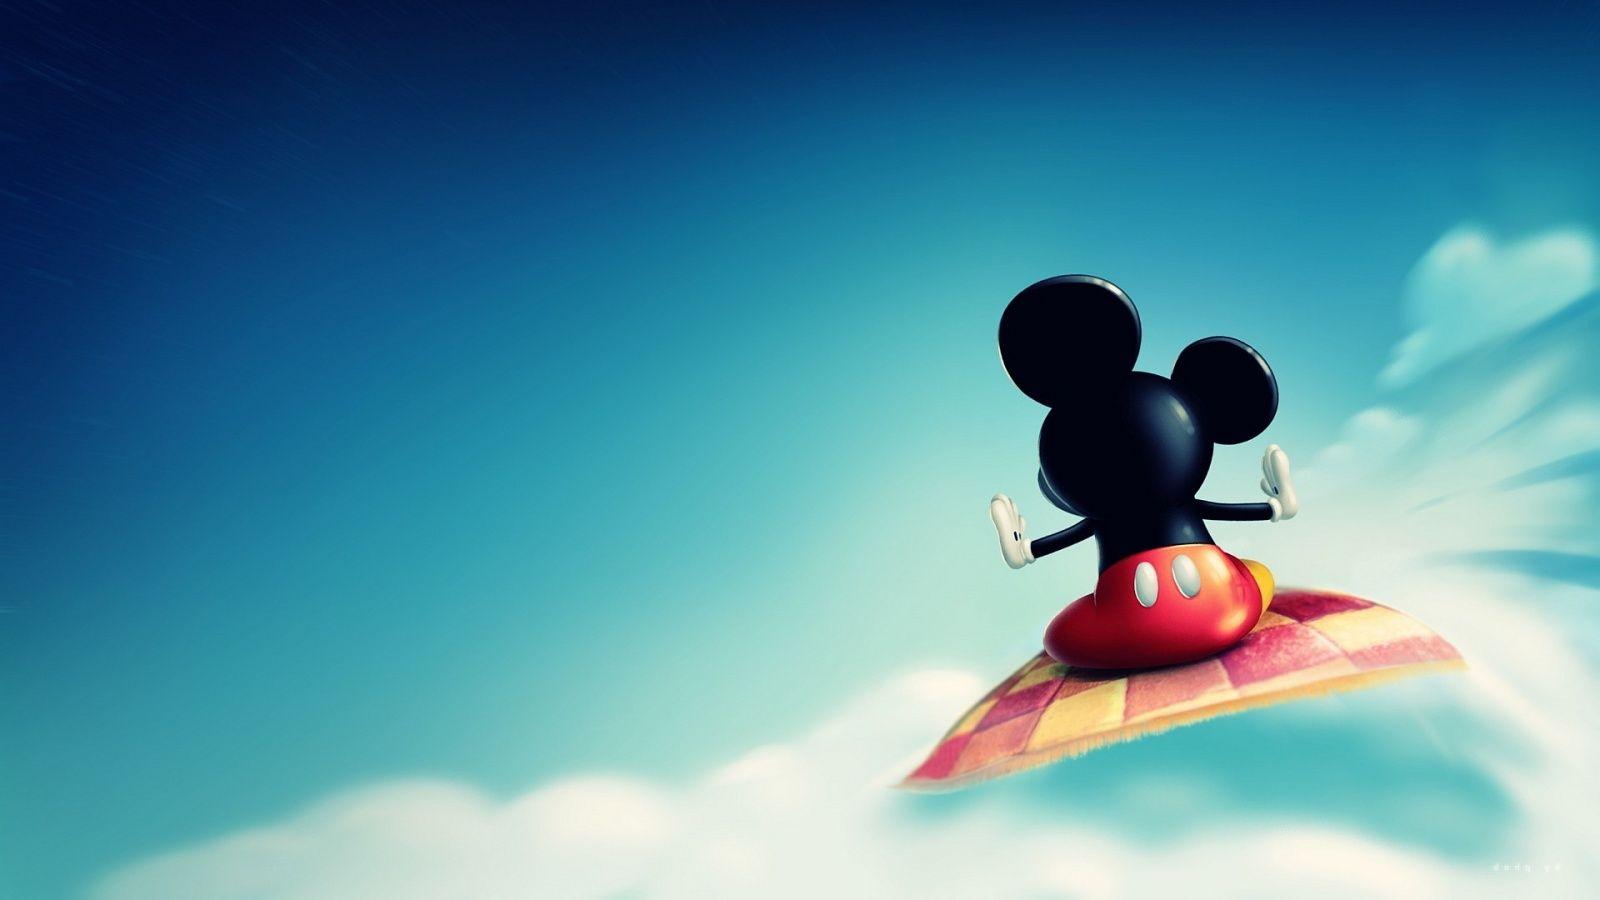 Mickey Mouse Wallpaper Image for Tablet